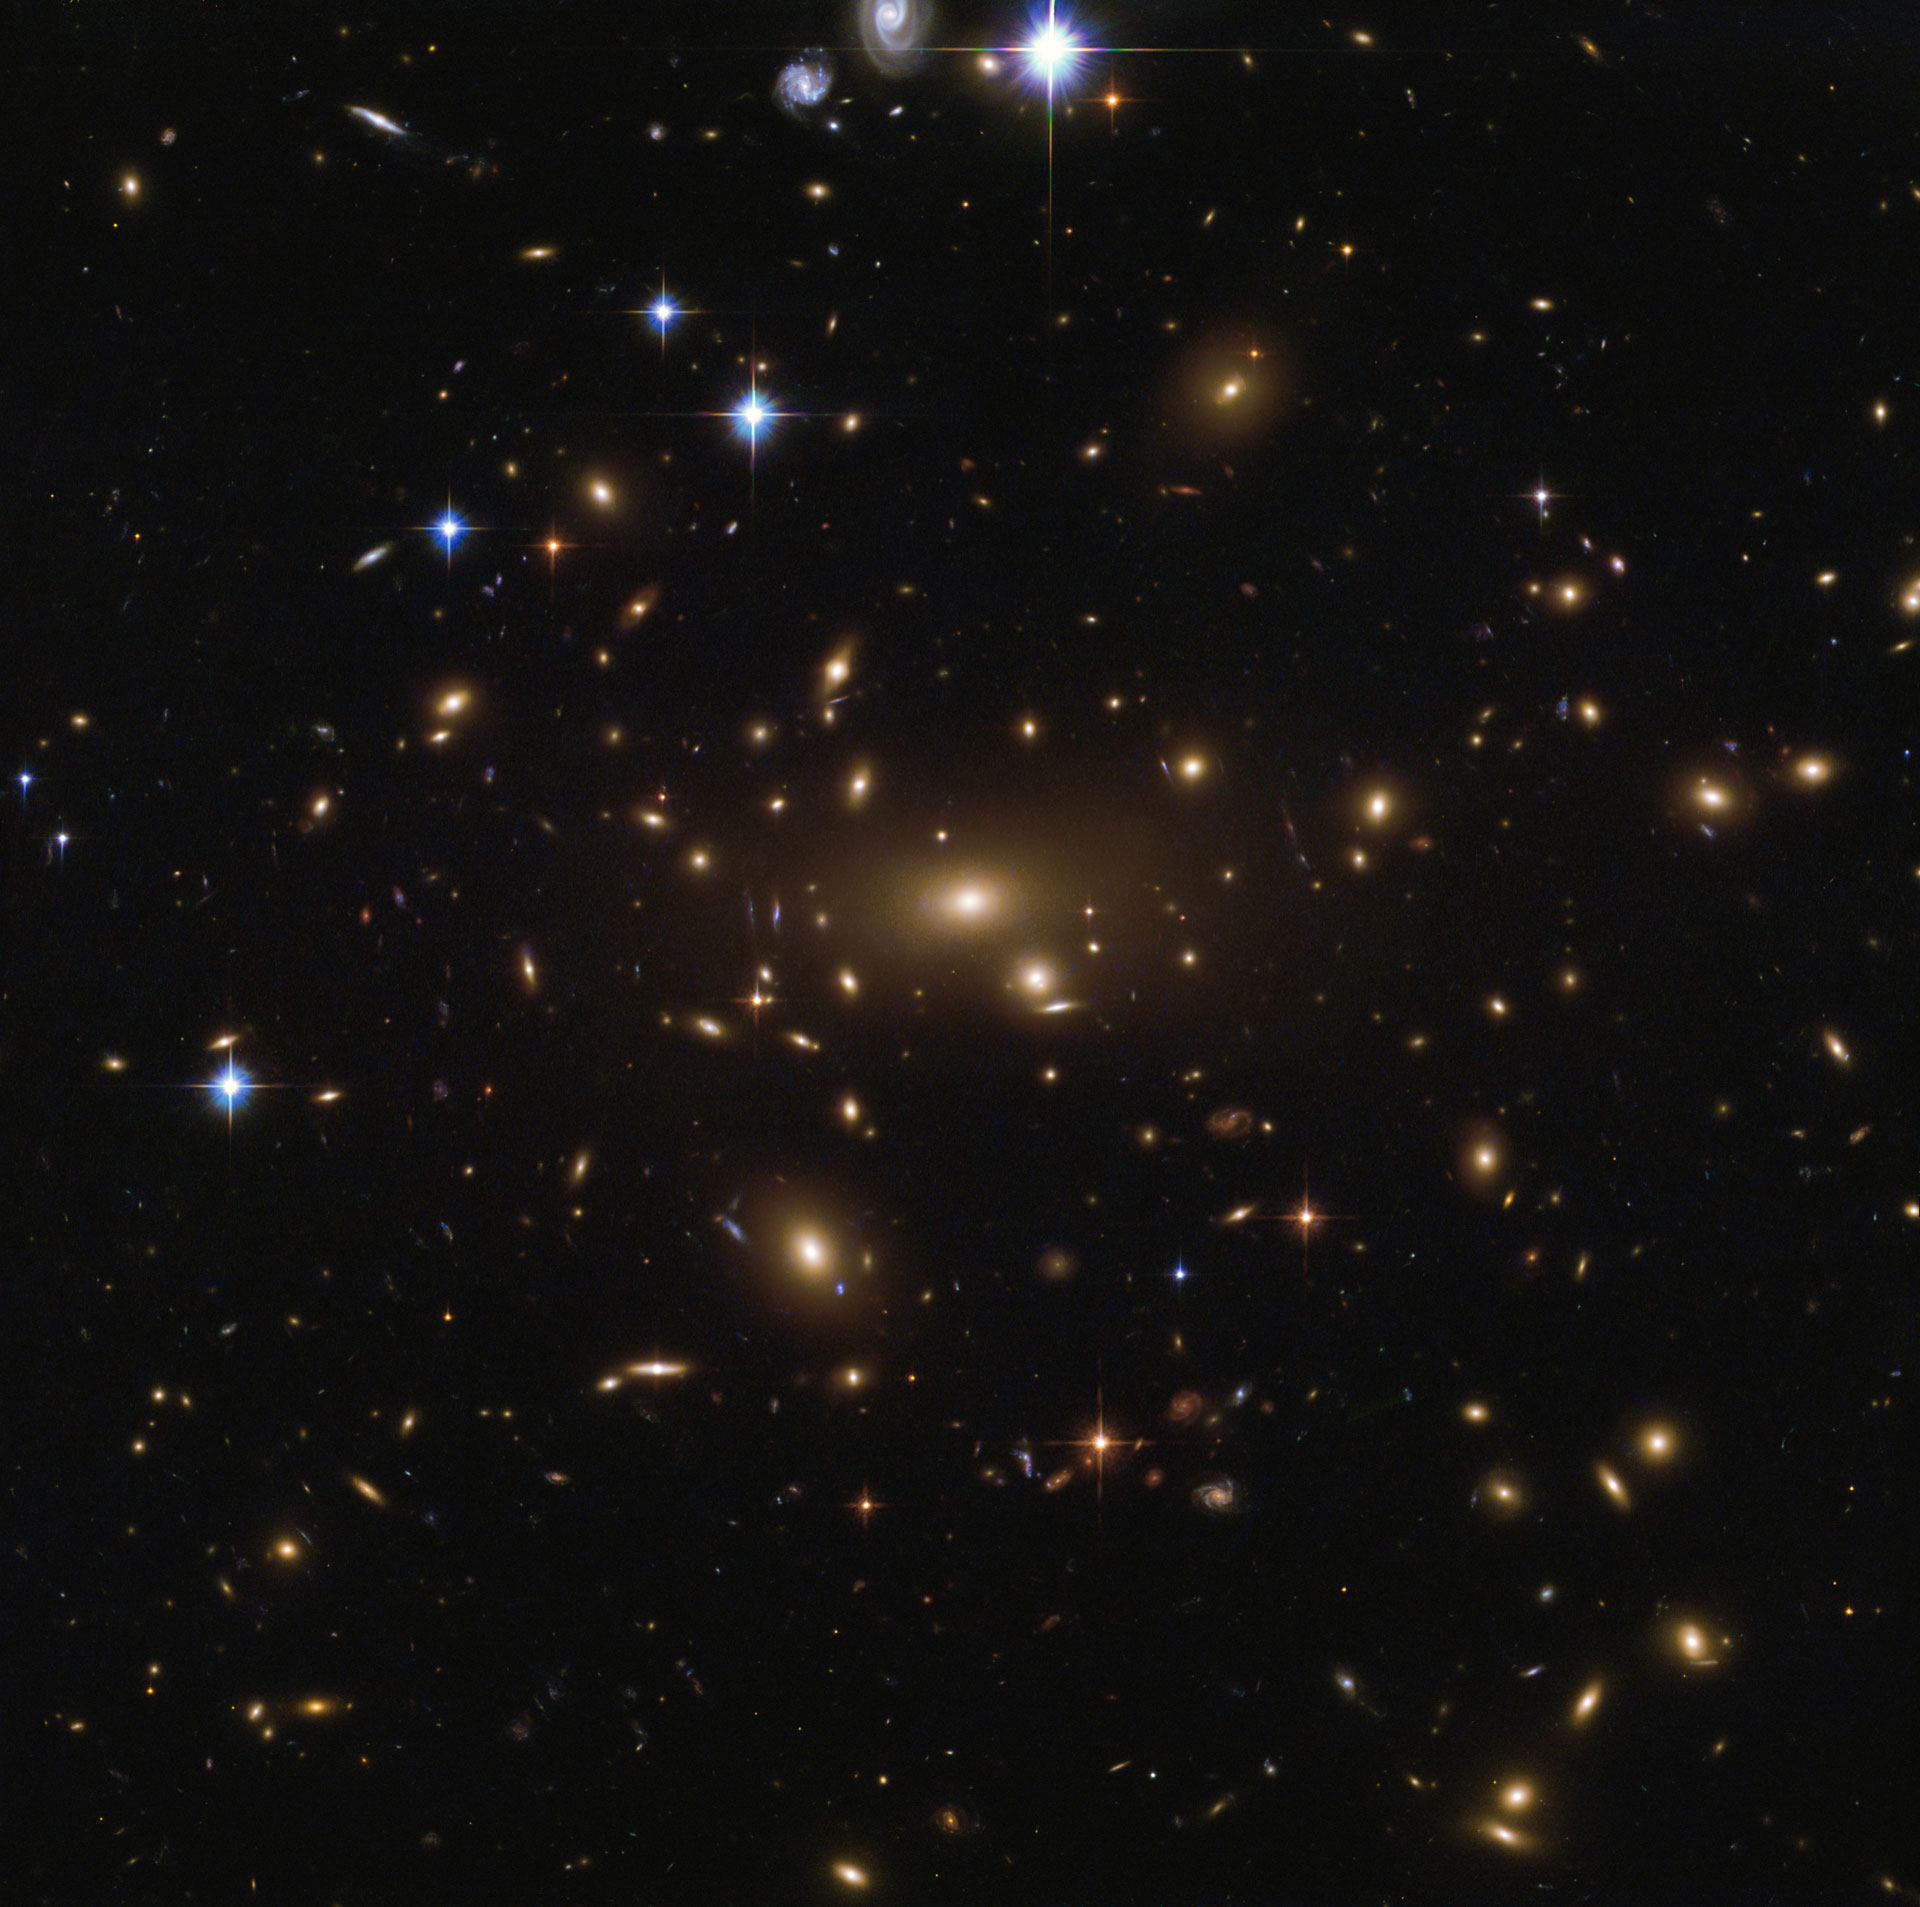 Hubble Space Telescope Image Of The Week Abell 665